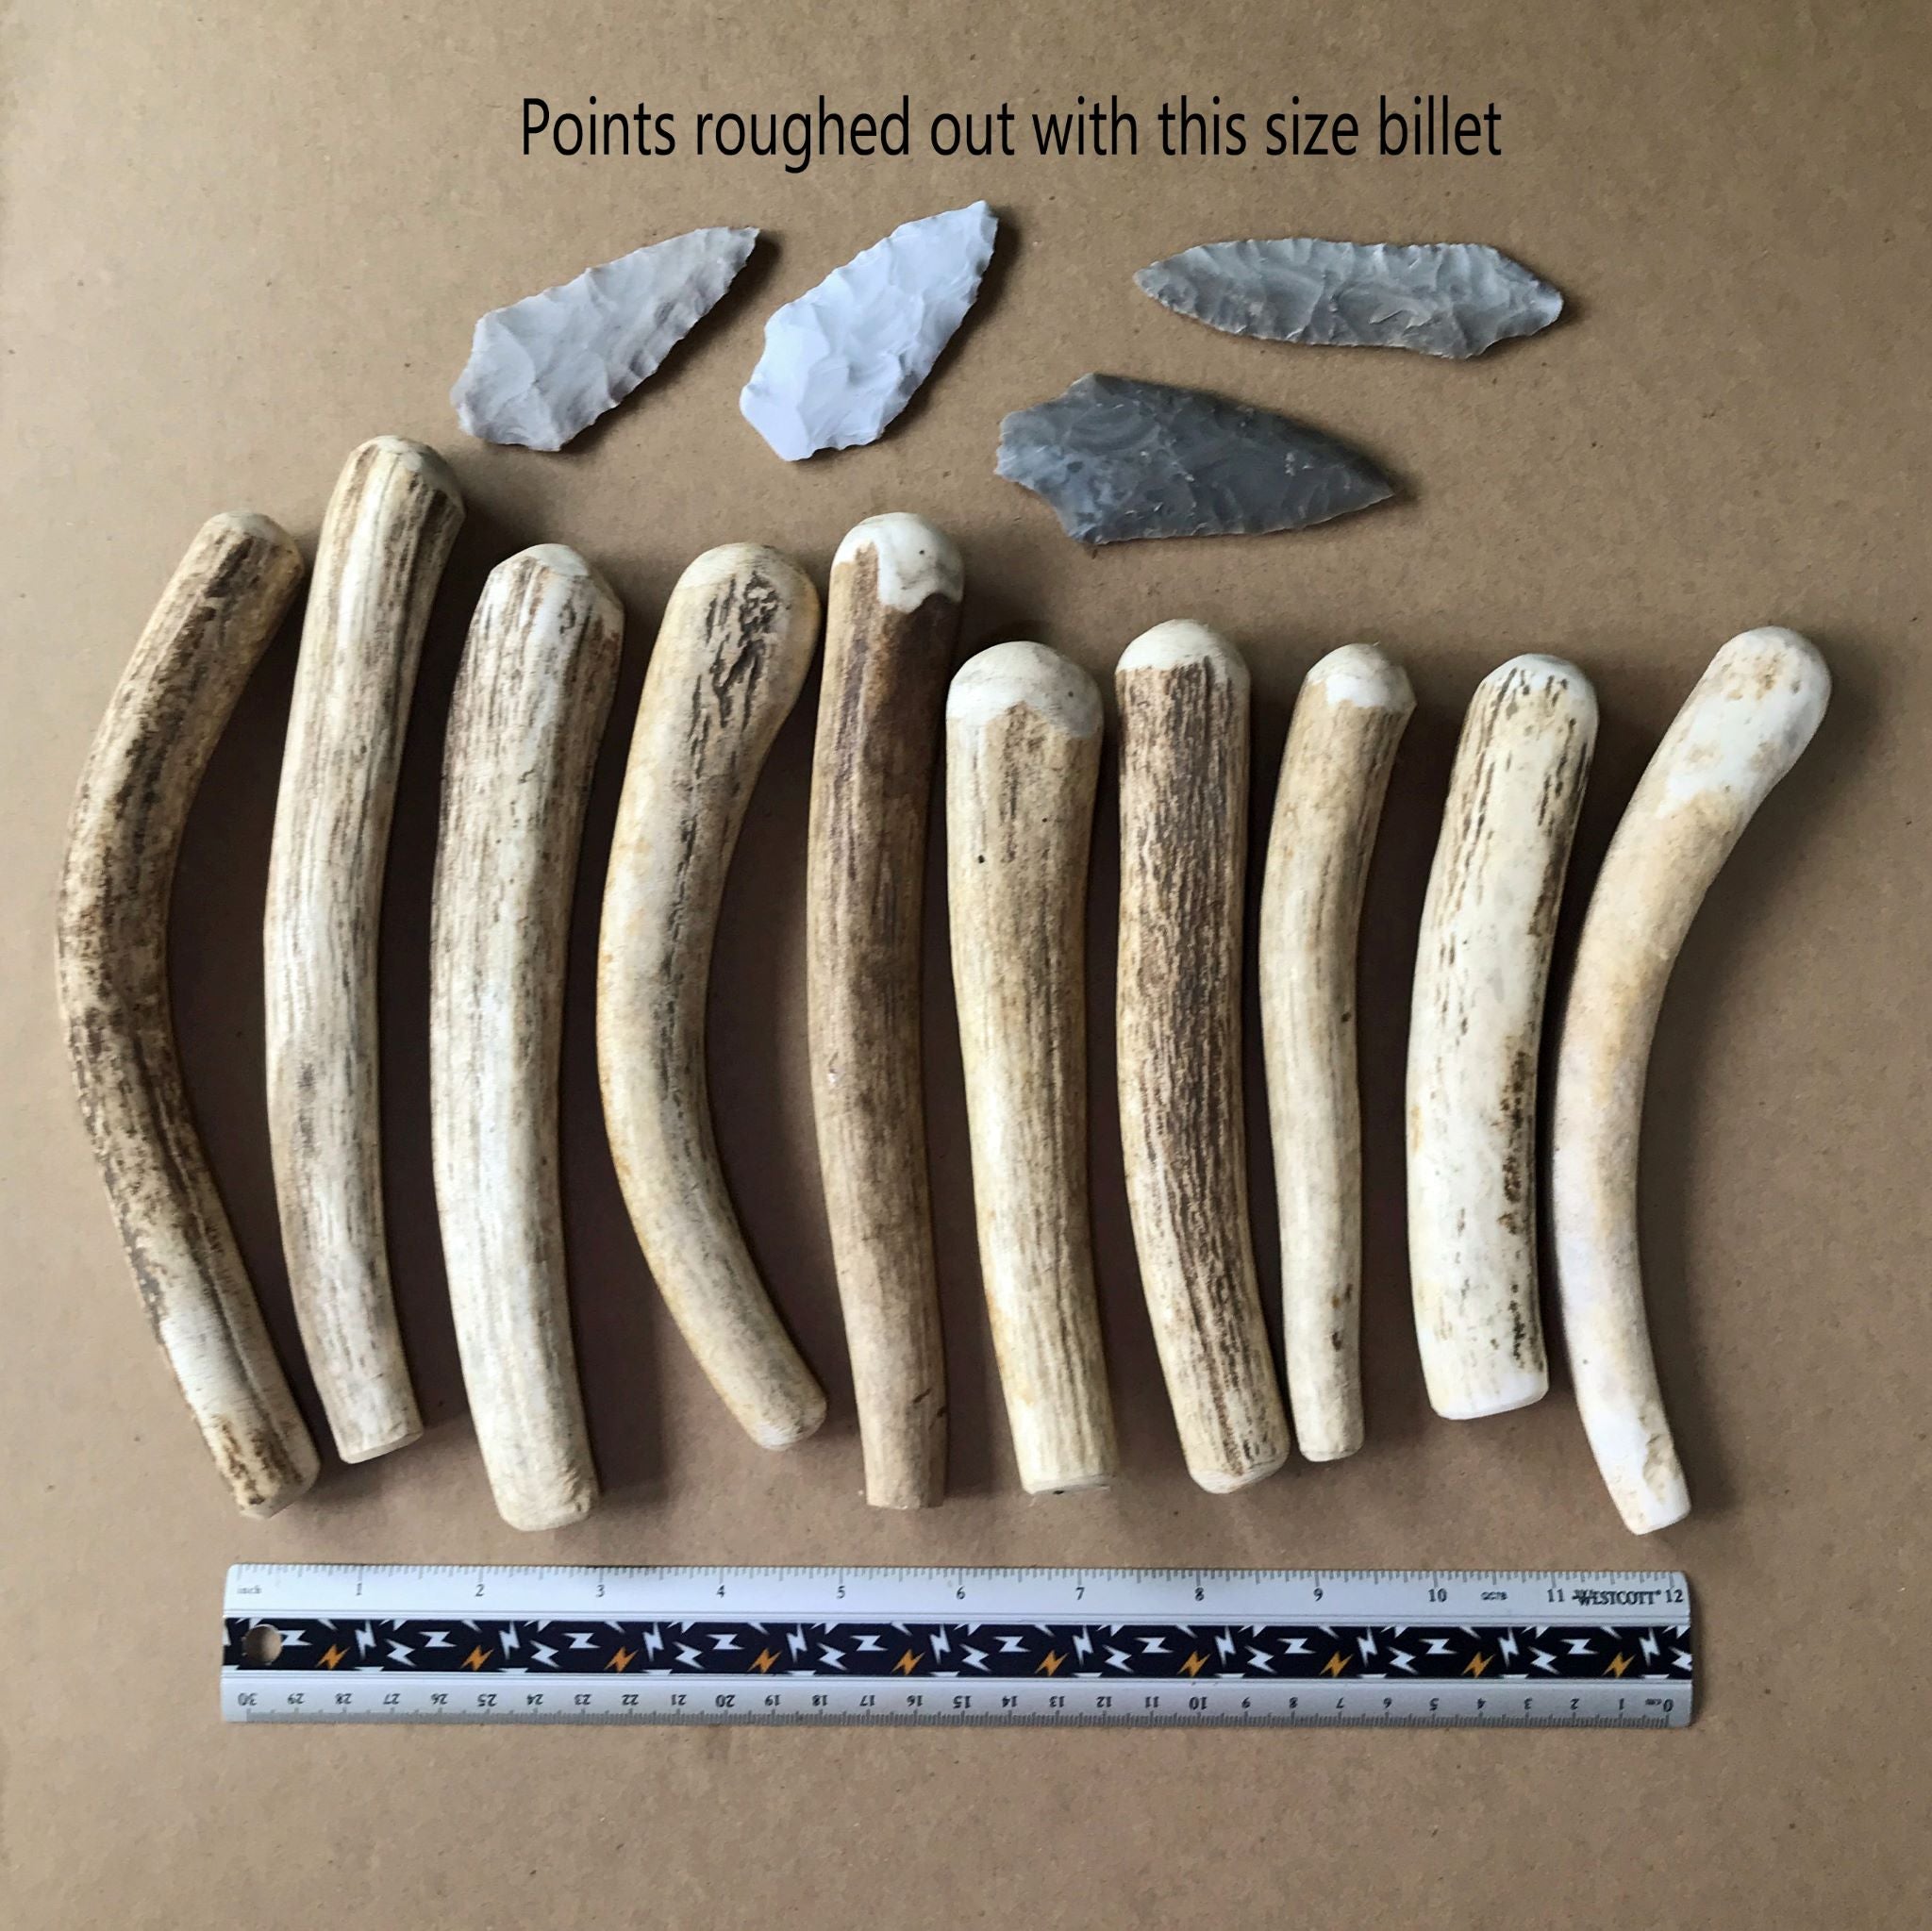 Flint-knapping tools: a. worked antler pressure flaker; b-e